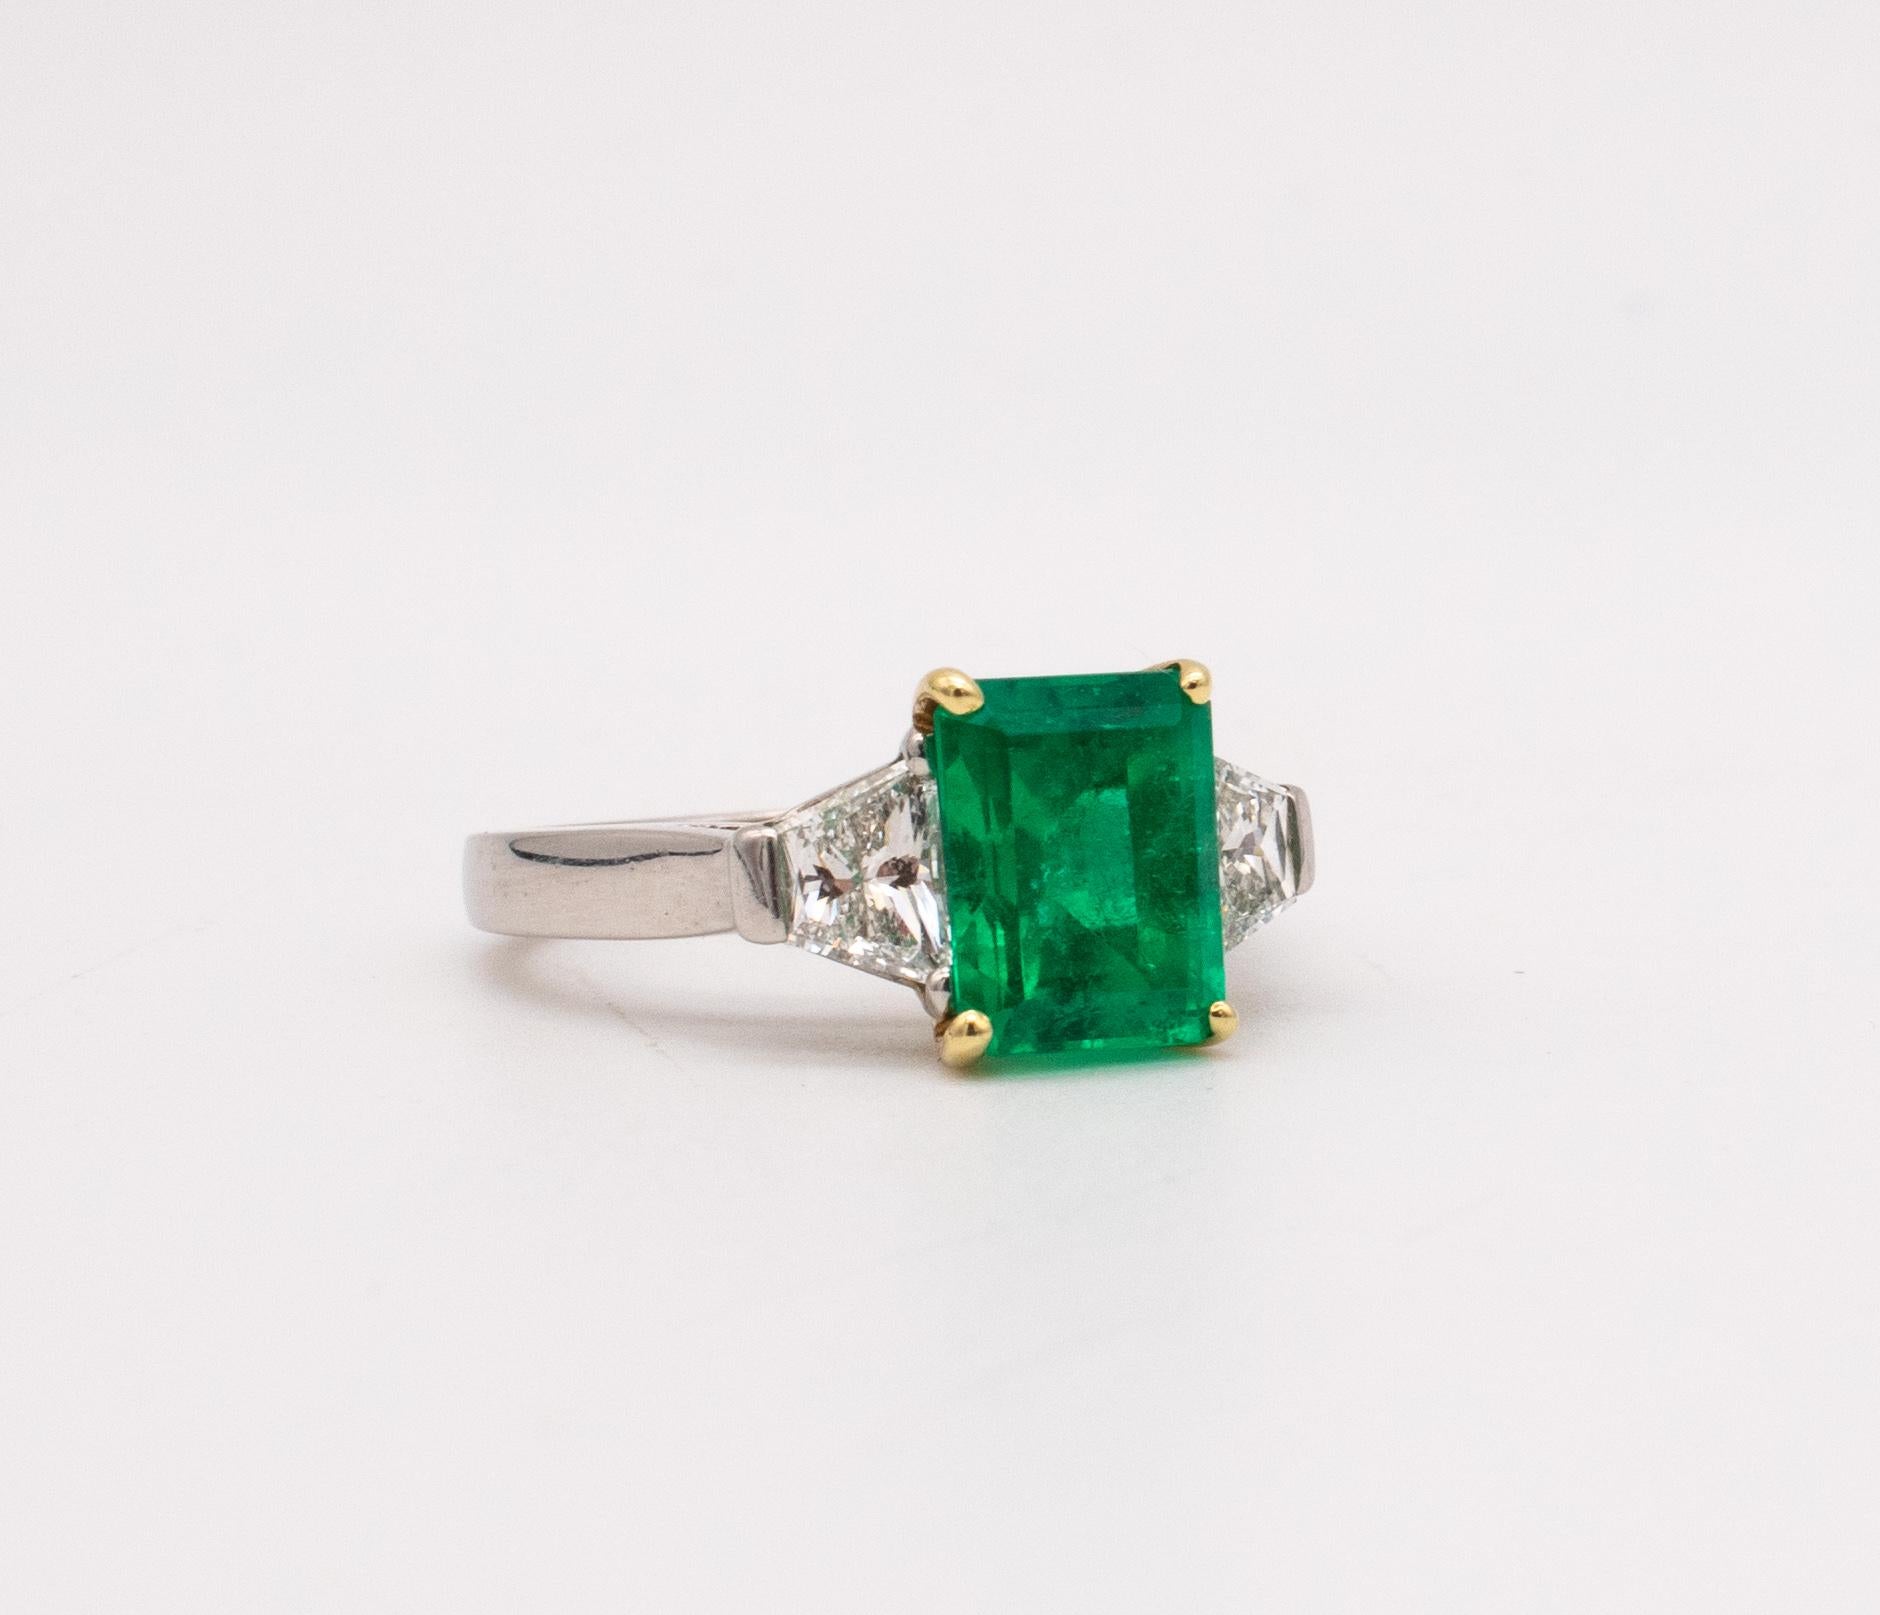 Oscar Heyman Gia Certified Classic Ring Plat 18Kt Gold 3.19 Cts Diamonds Emerald For Sale 1